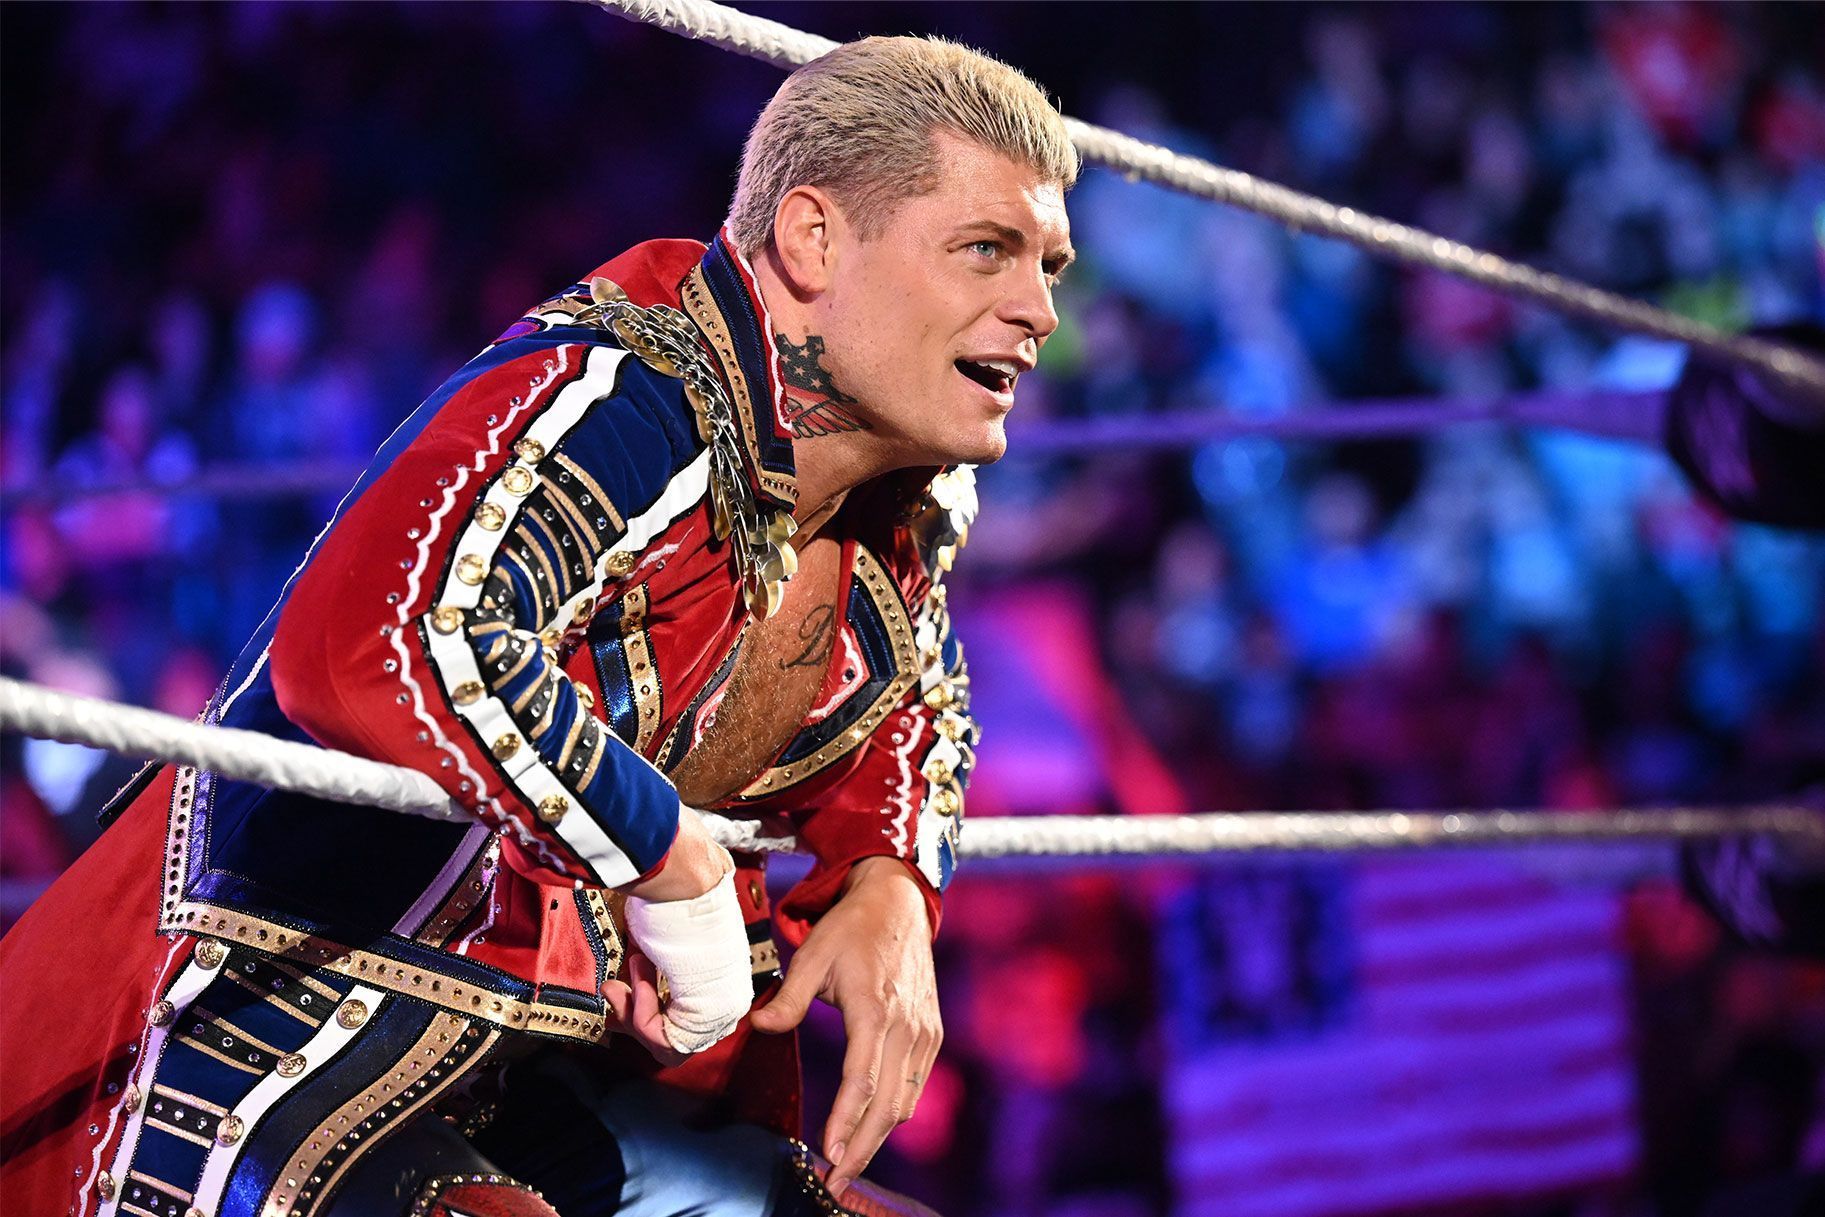 Cody Rhodes returned to WWE at the Royal Rumble